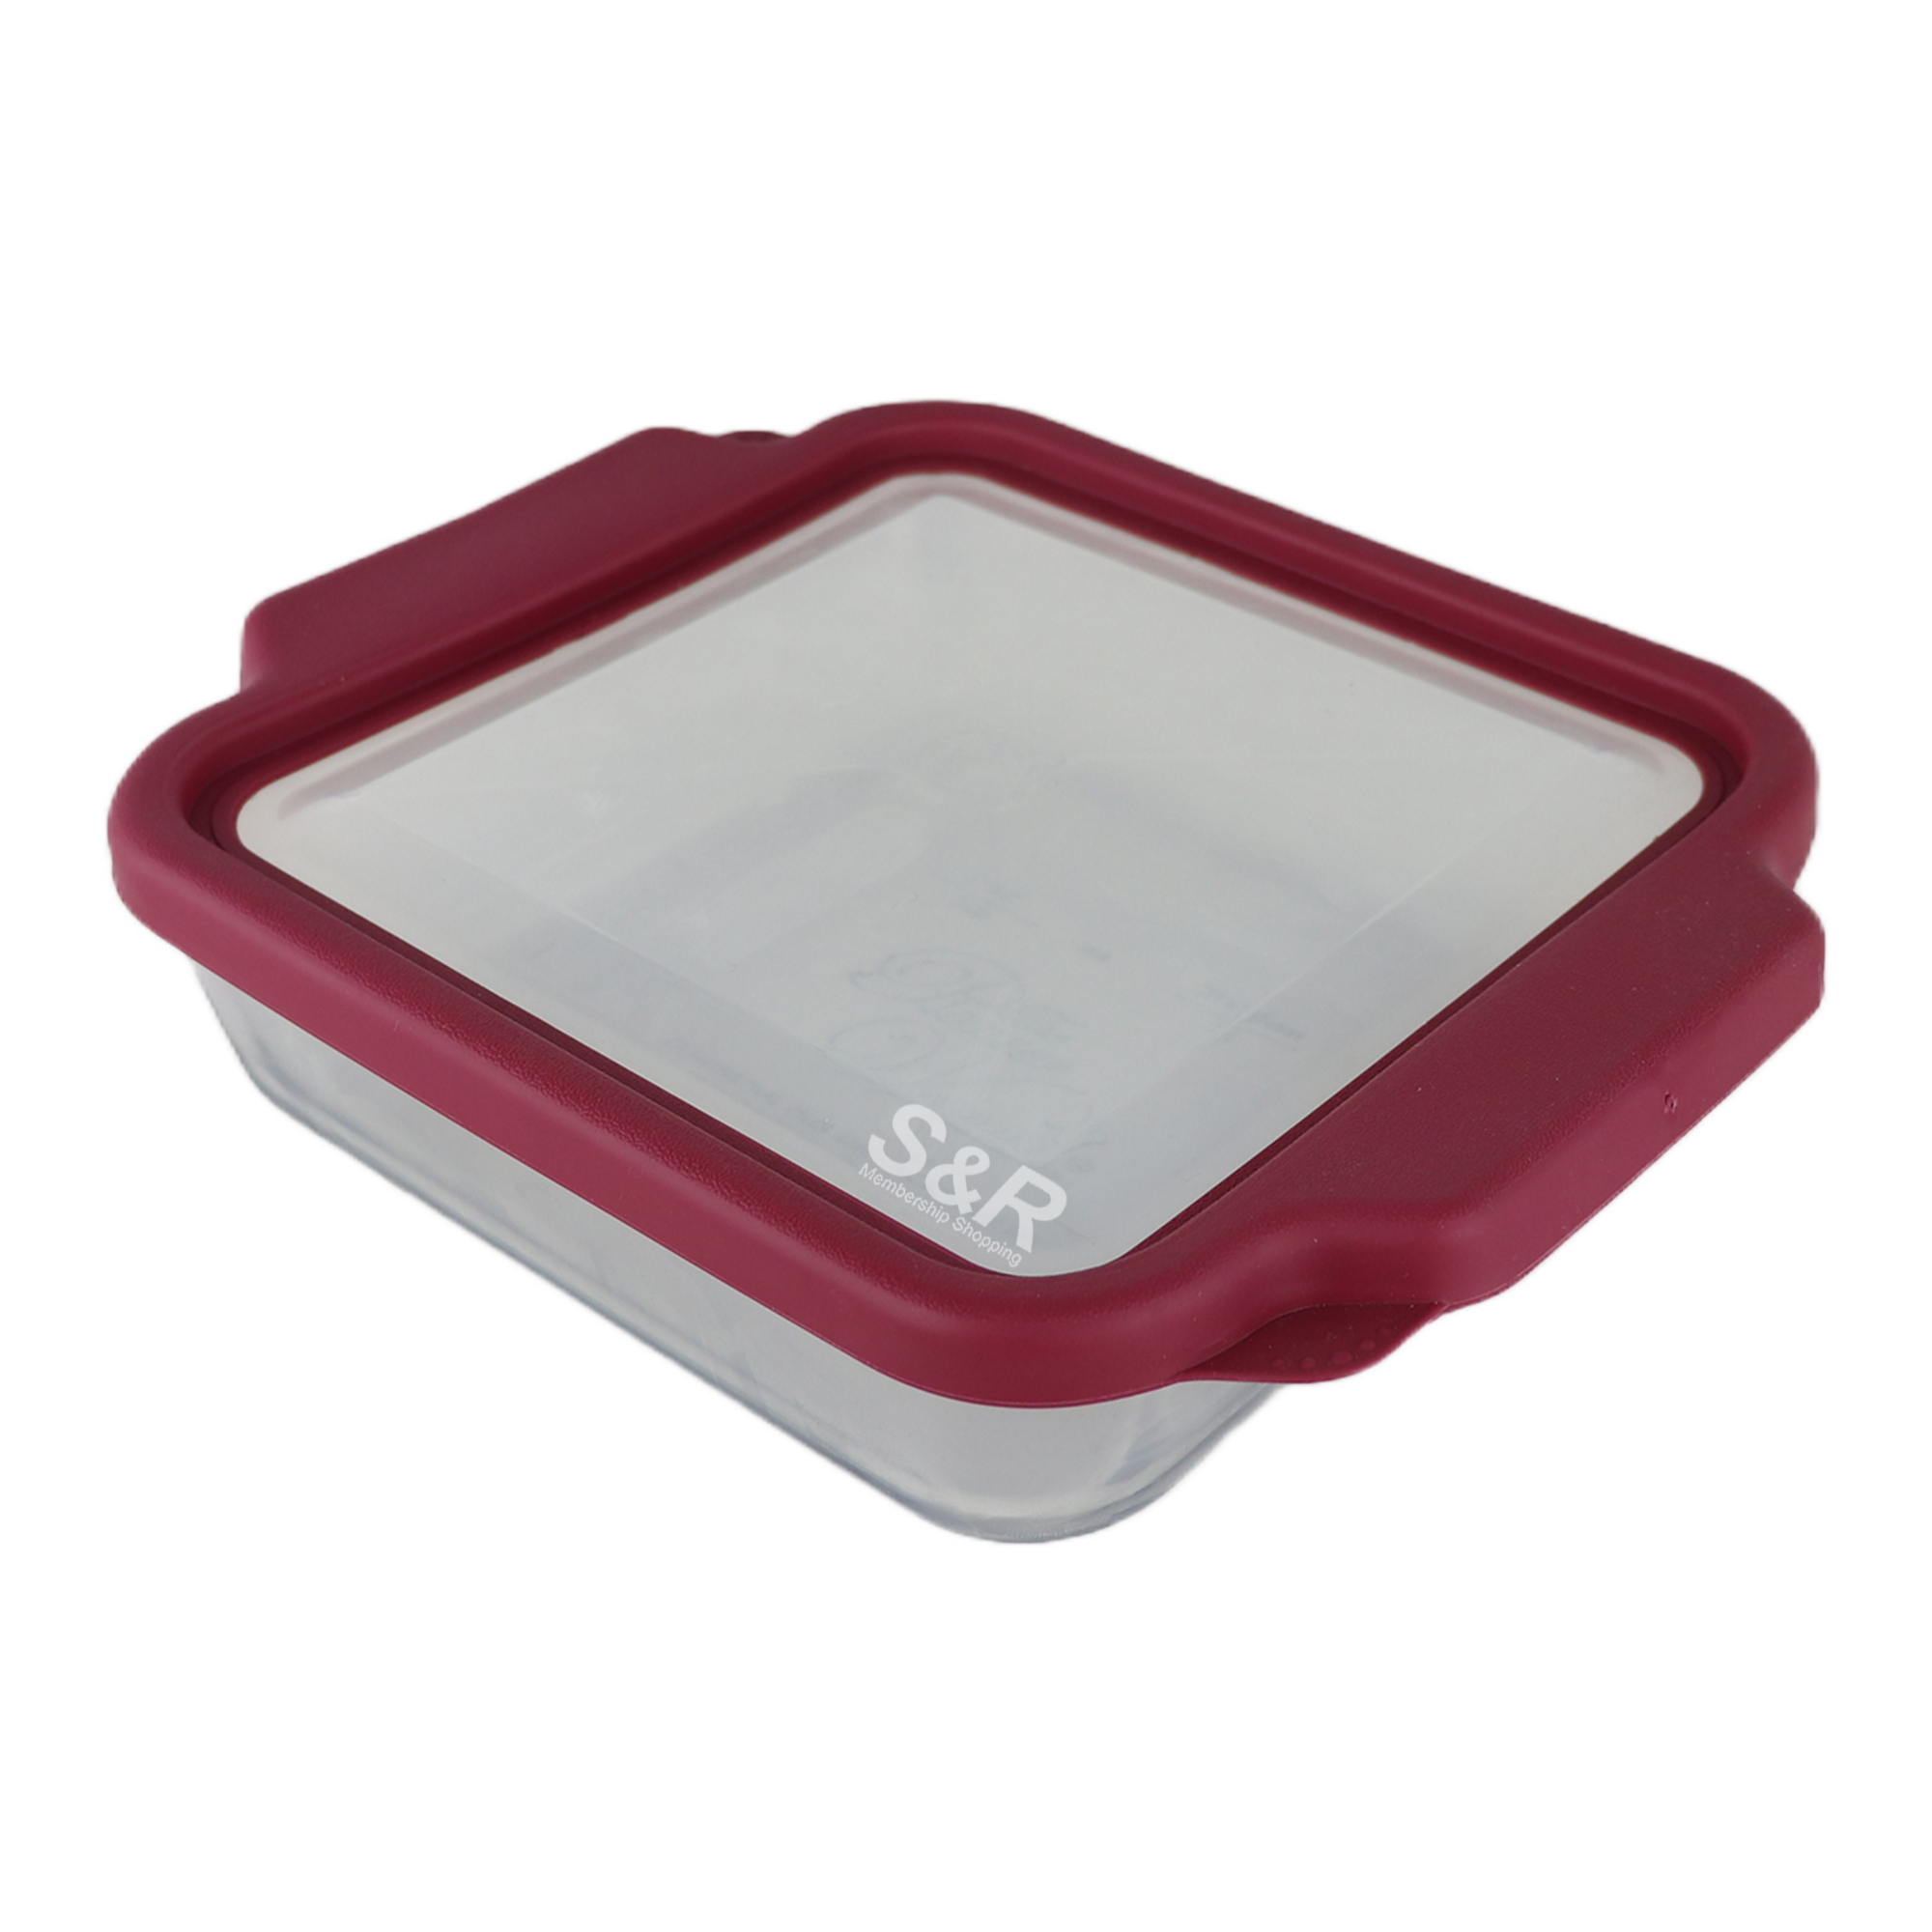 The Pioneer 2L Woman Bake Dish 1pc